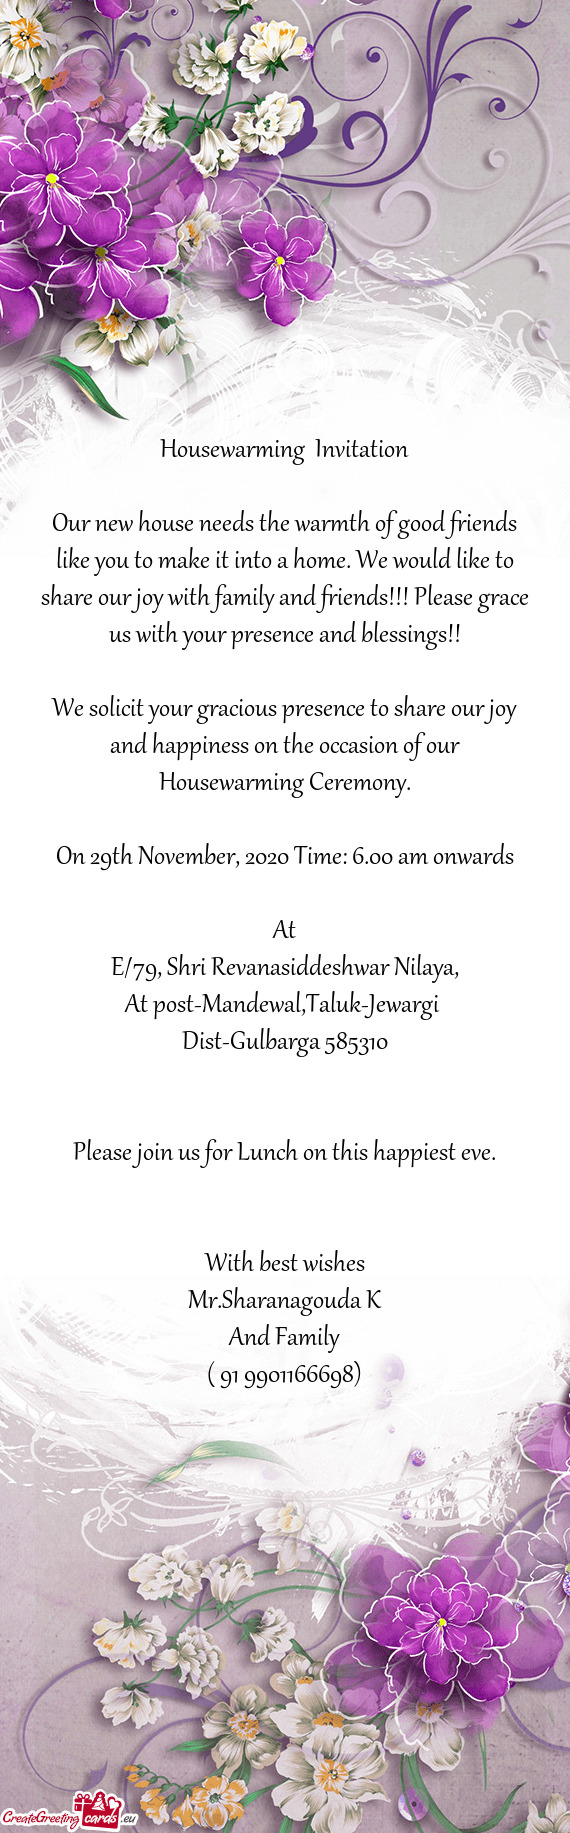 Please join us for Lunch on this happiest eve